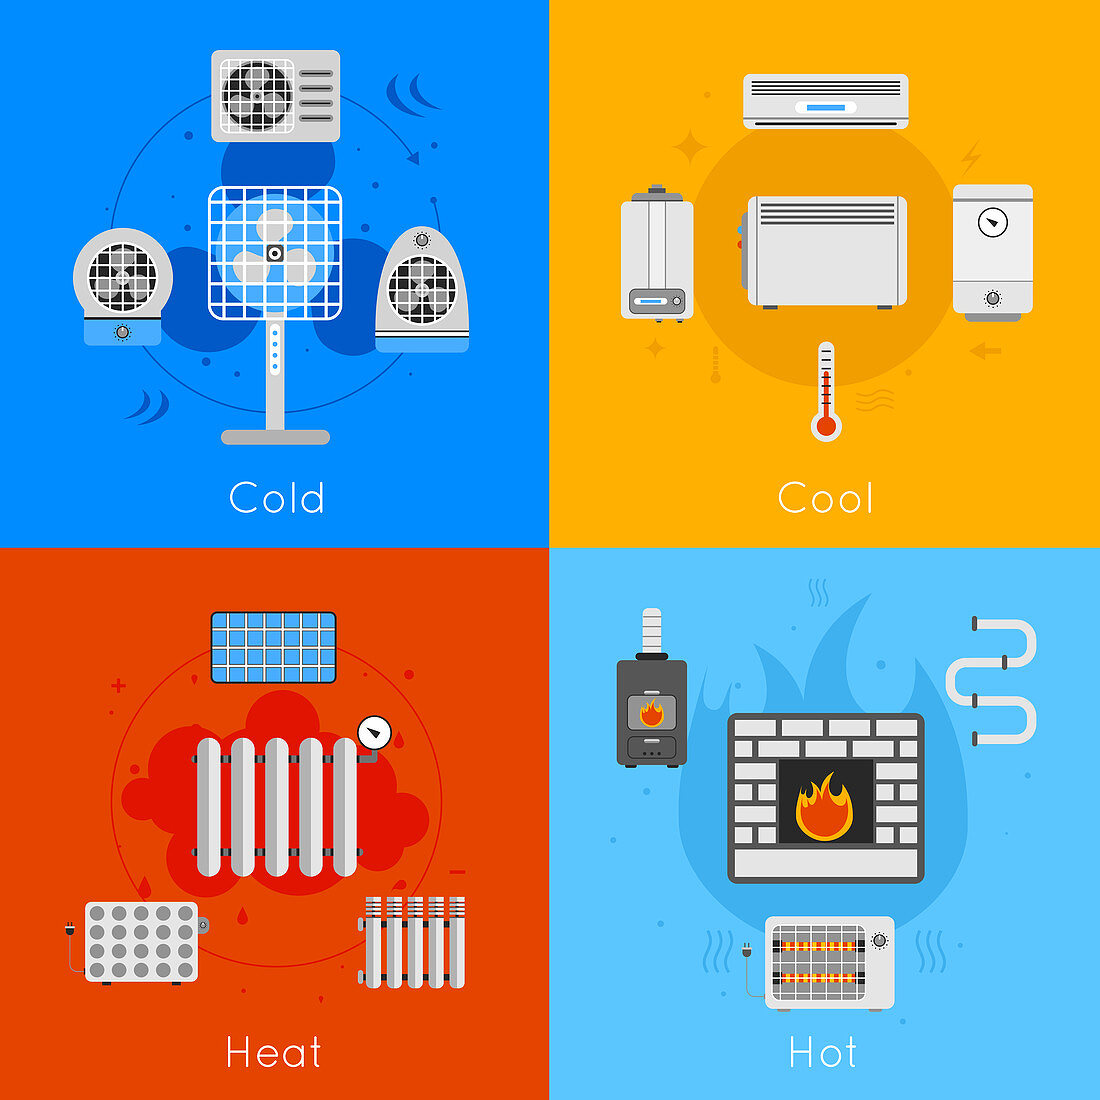 Heating and cooling devices, illustration